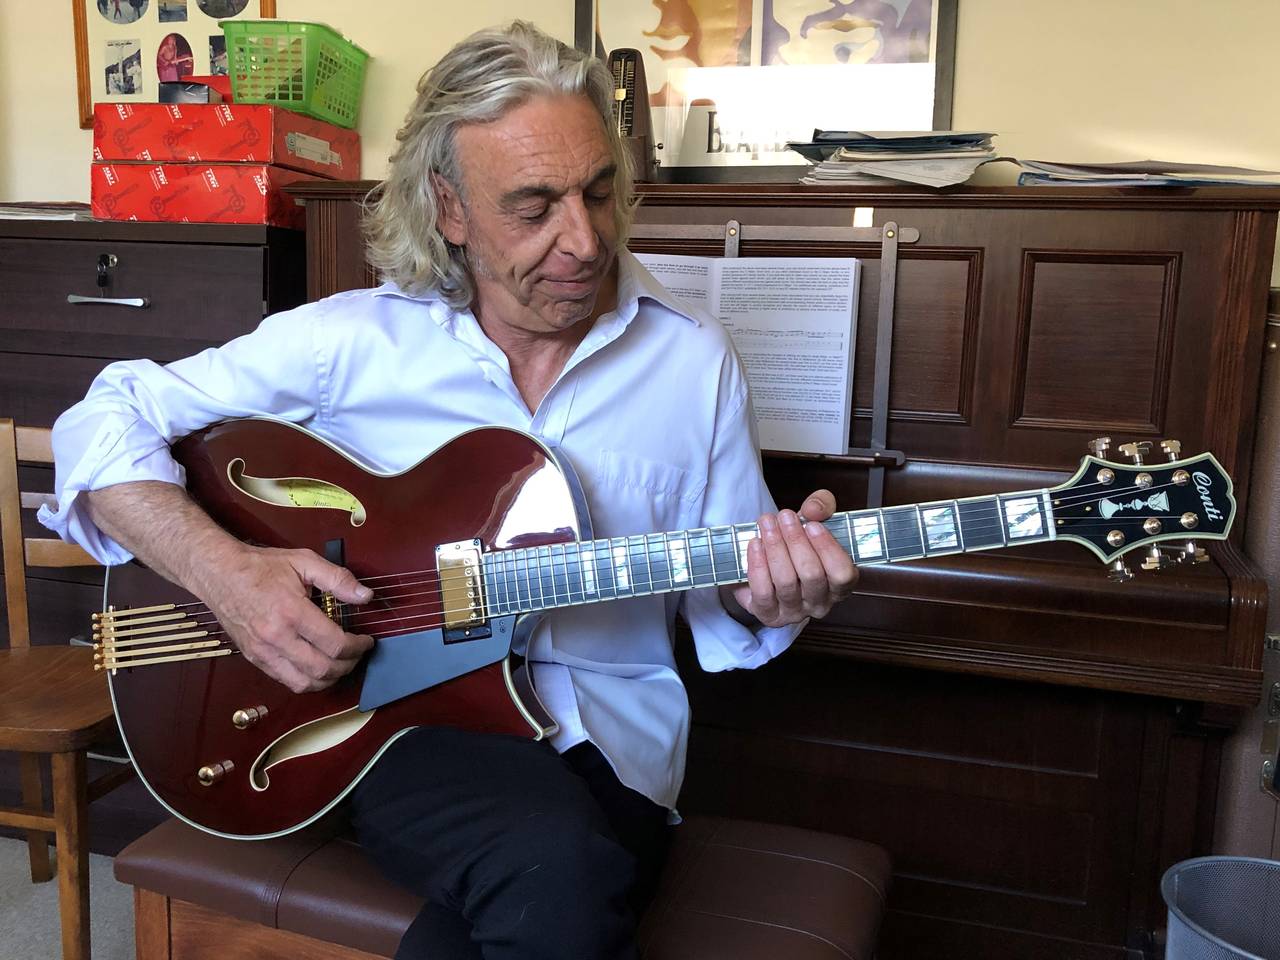 All the way in Australia, new owner Tony Silber enjoys his Port Wine Conti Entrada archtop guitar